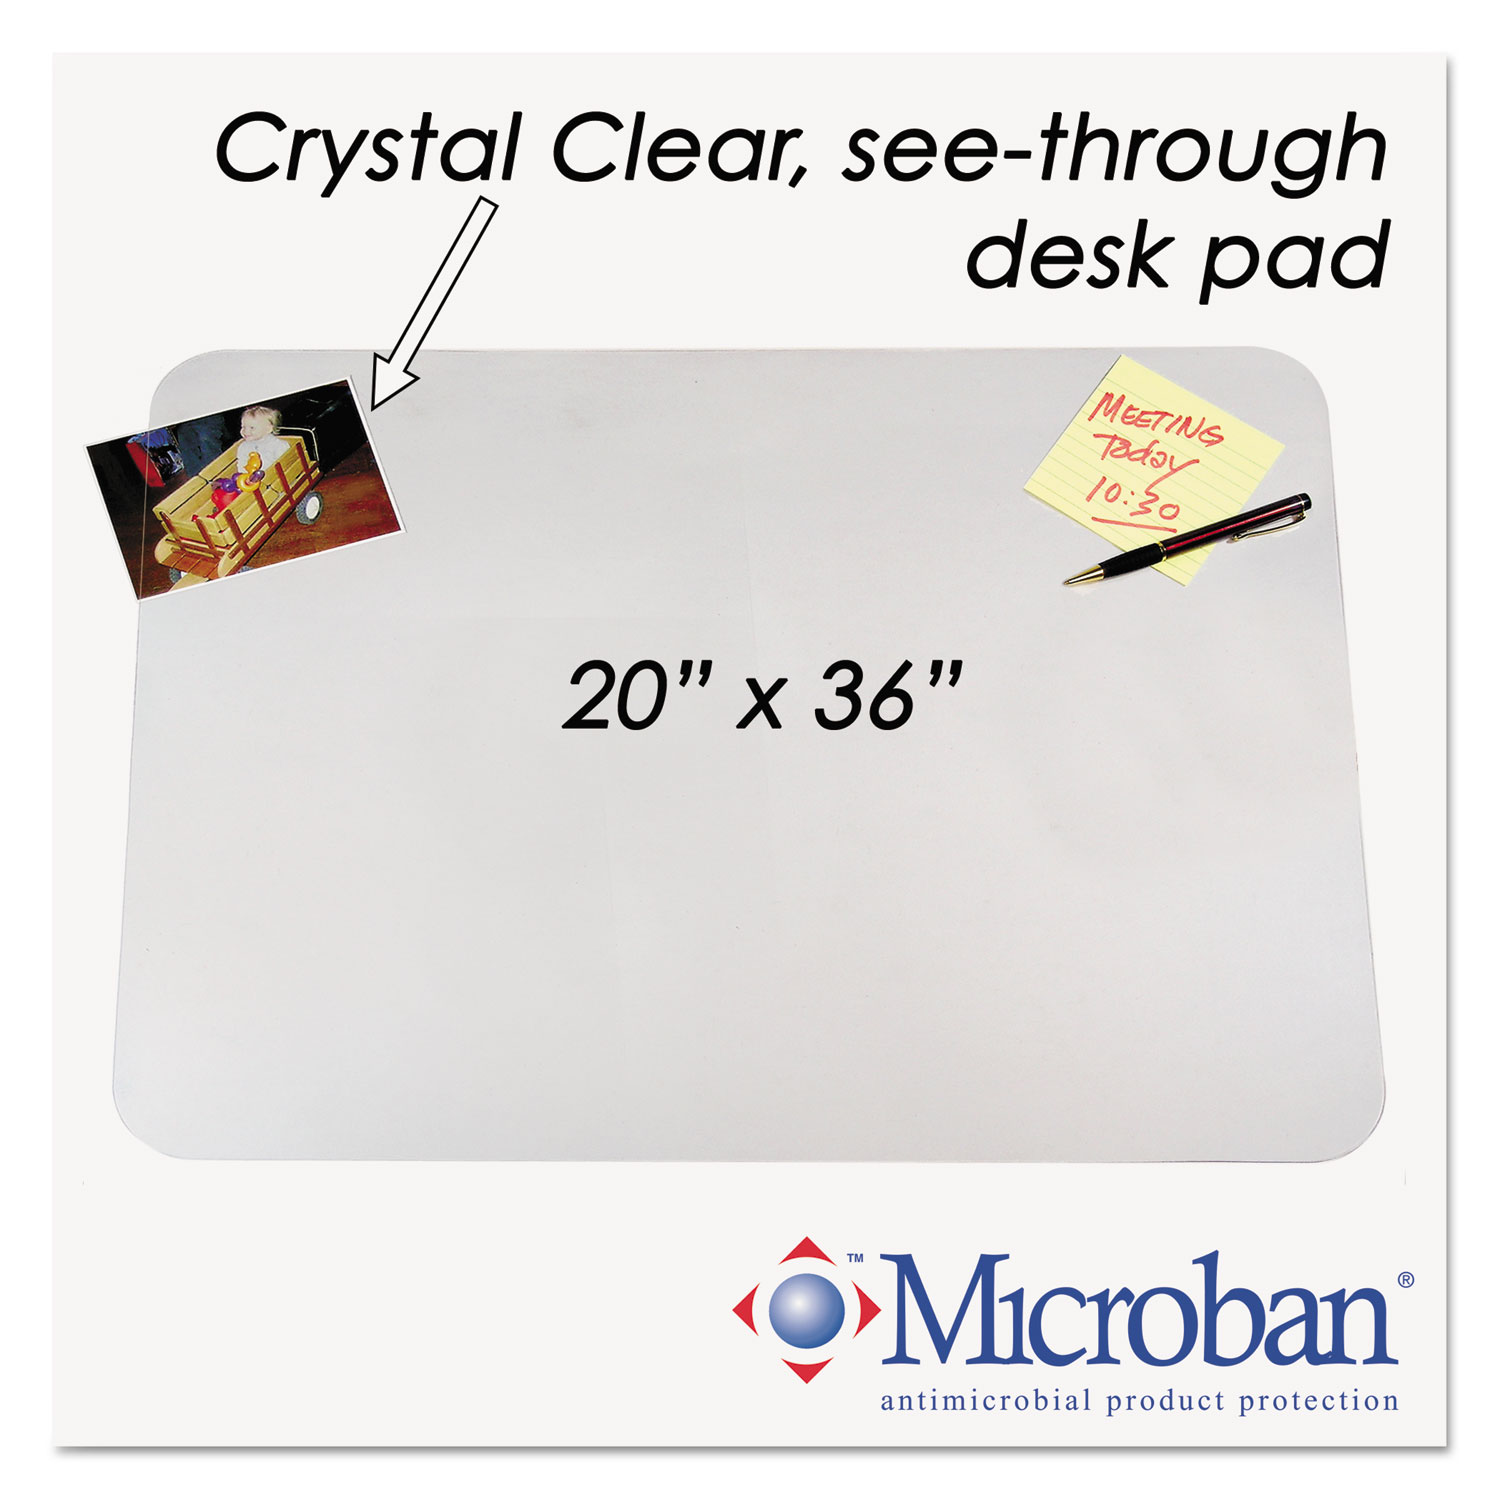 KrystalView Desk Pad with Microban, 36 x 20, Clear